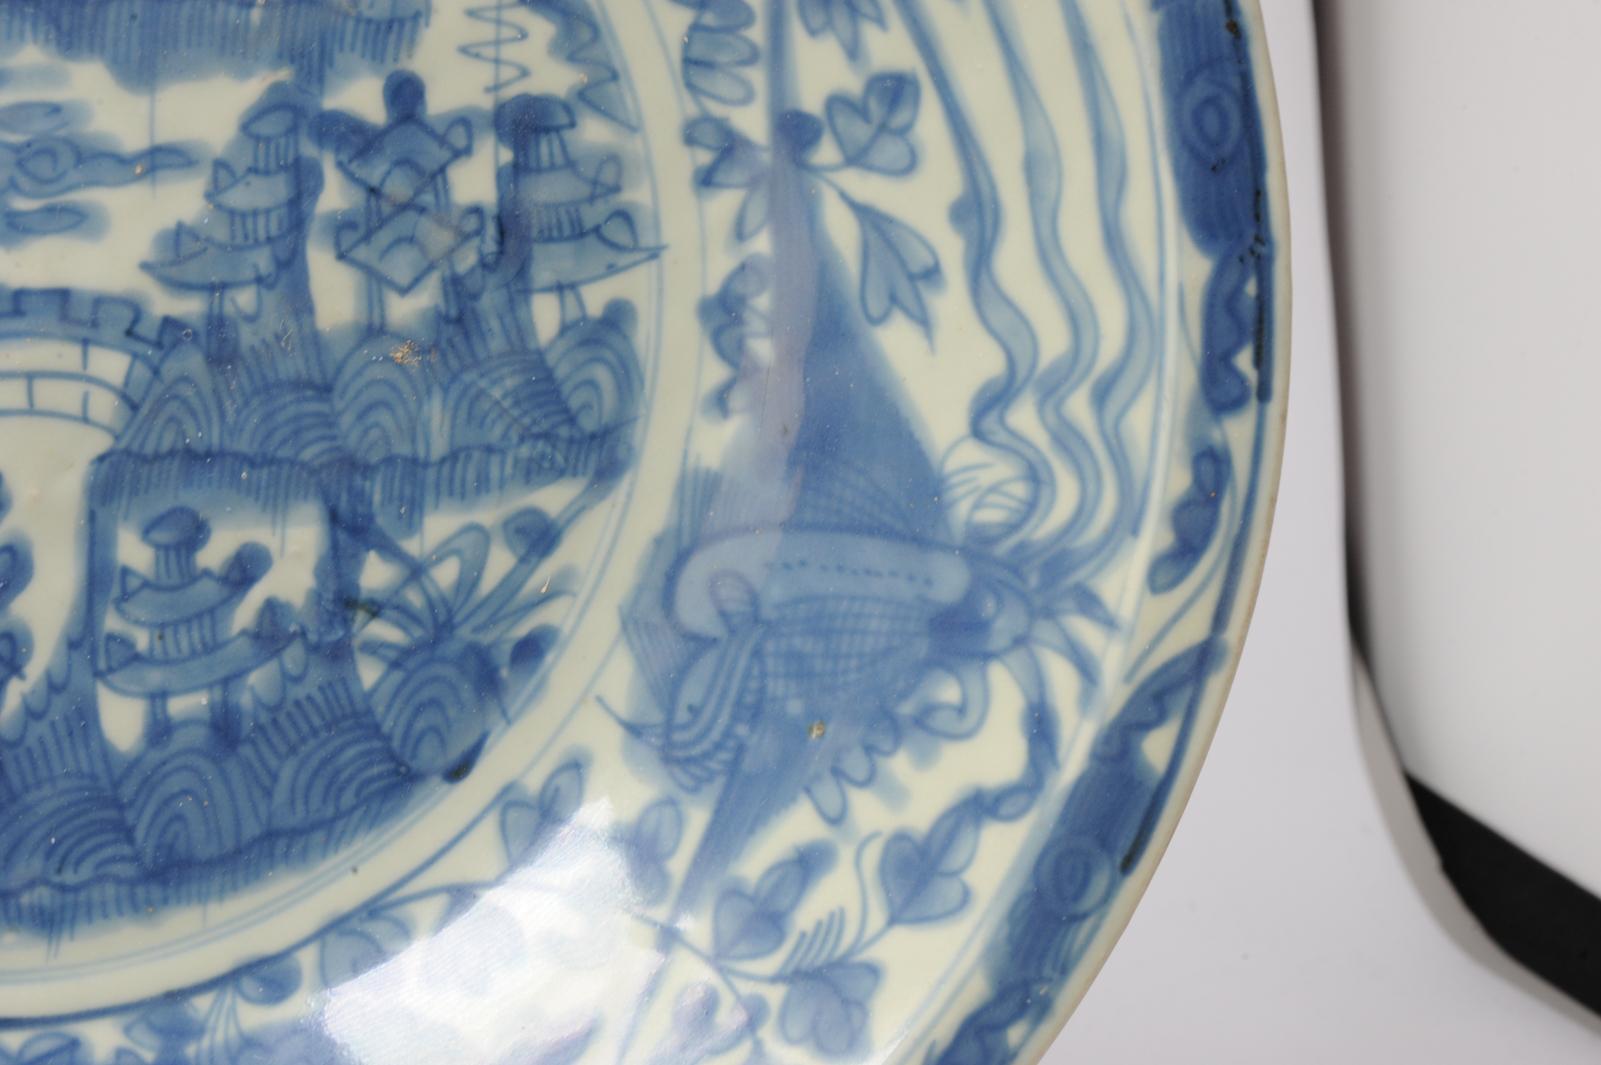 Majestic and Large Chinese Ming period Swatow Charger with beautiful scene of a landscape with pagodes and Fenghuang/Phoenixes. The stand is not included.

Additional information:
Material: Porcelain & Pottery
Category: Zhanghzou/Swatow
Region of